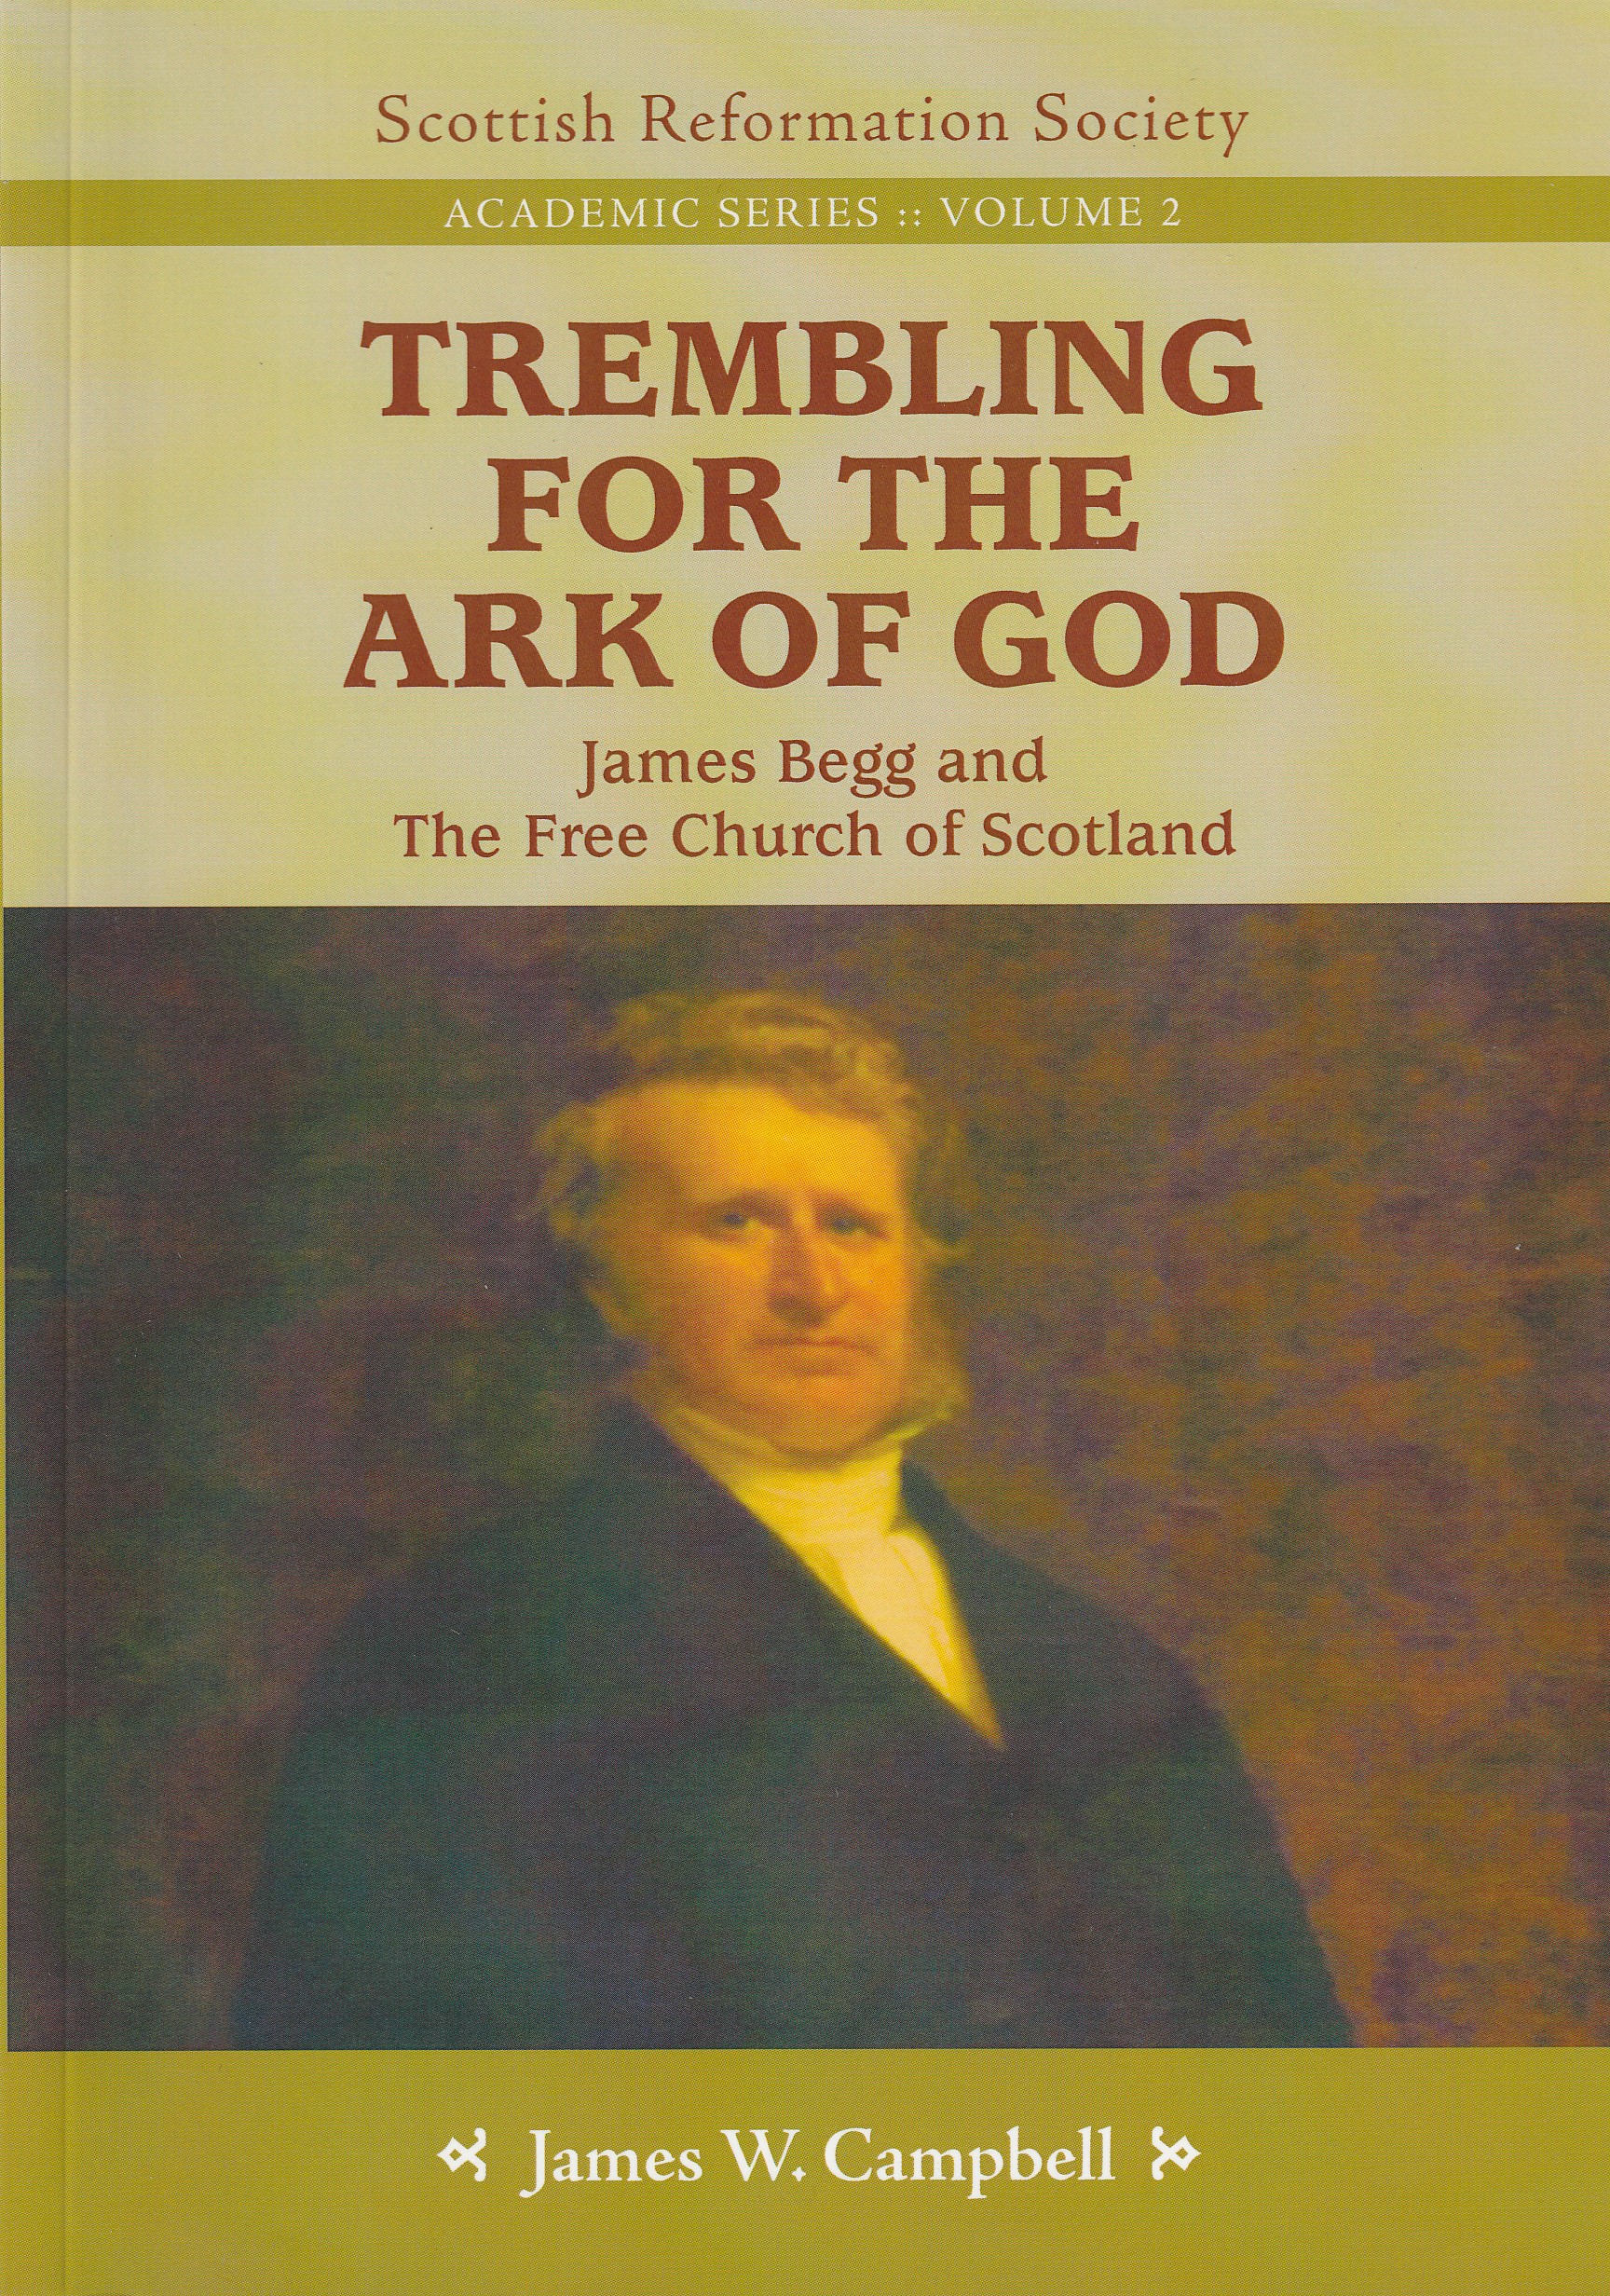 Trembling for the Ark of God: James Begg and the Free Church of Scotland